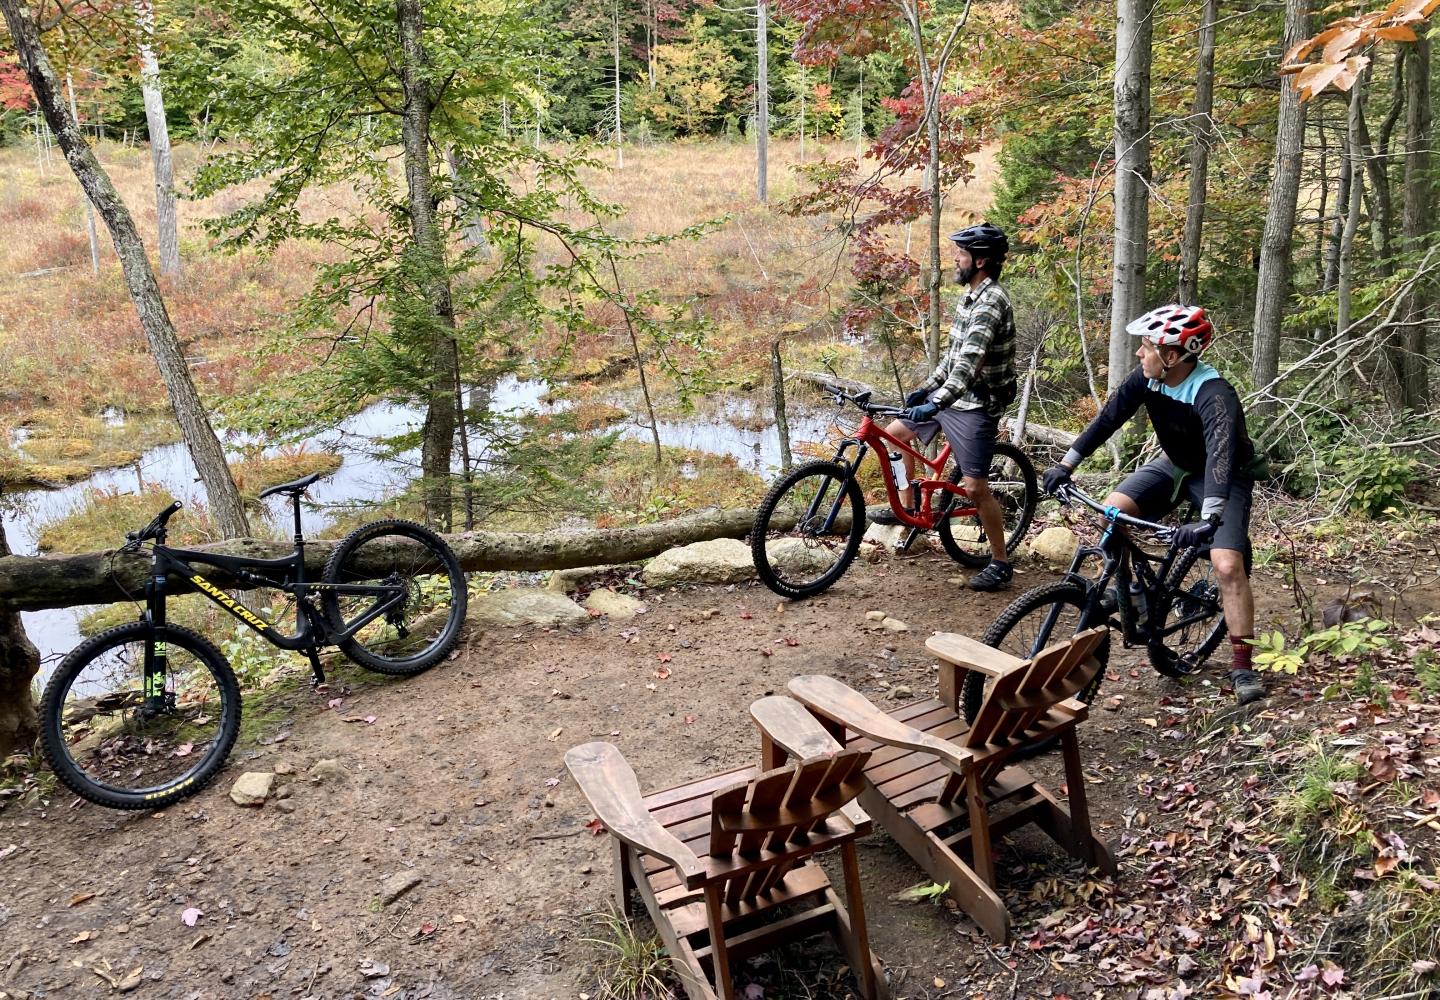 Mountain bikers take in the view at McCauley Mountain during the Adirondack Mountain Bike Festival